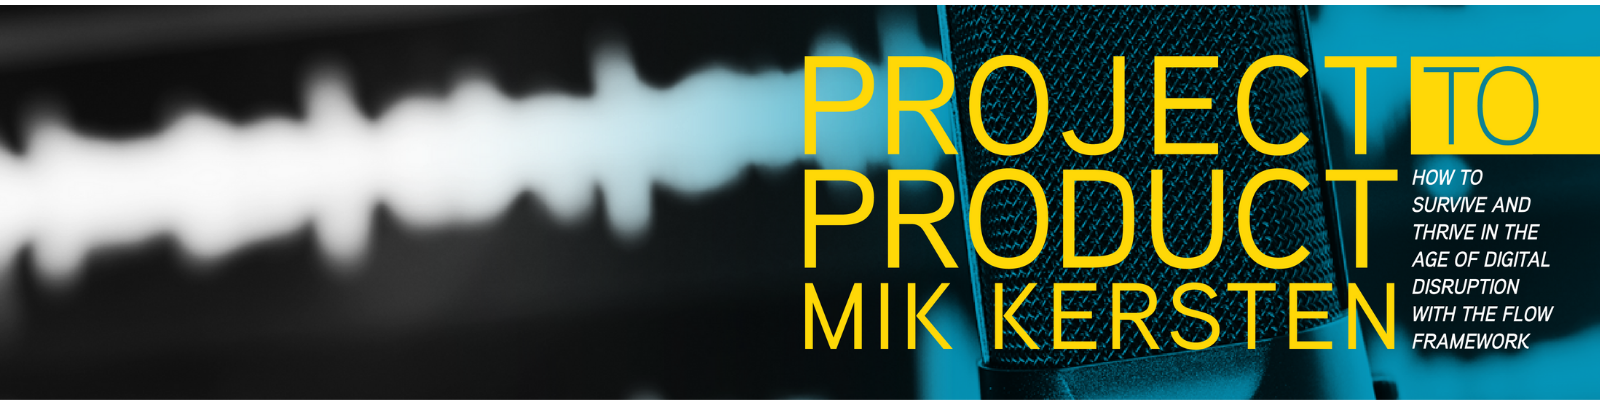 Mik + One: The Official Project to Product Podcast by Dr. Mik Kersten